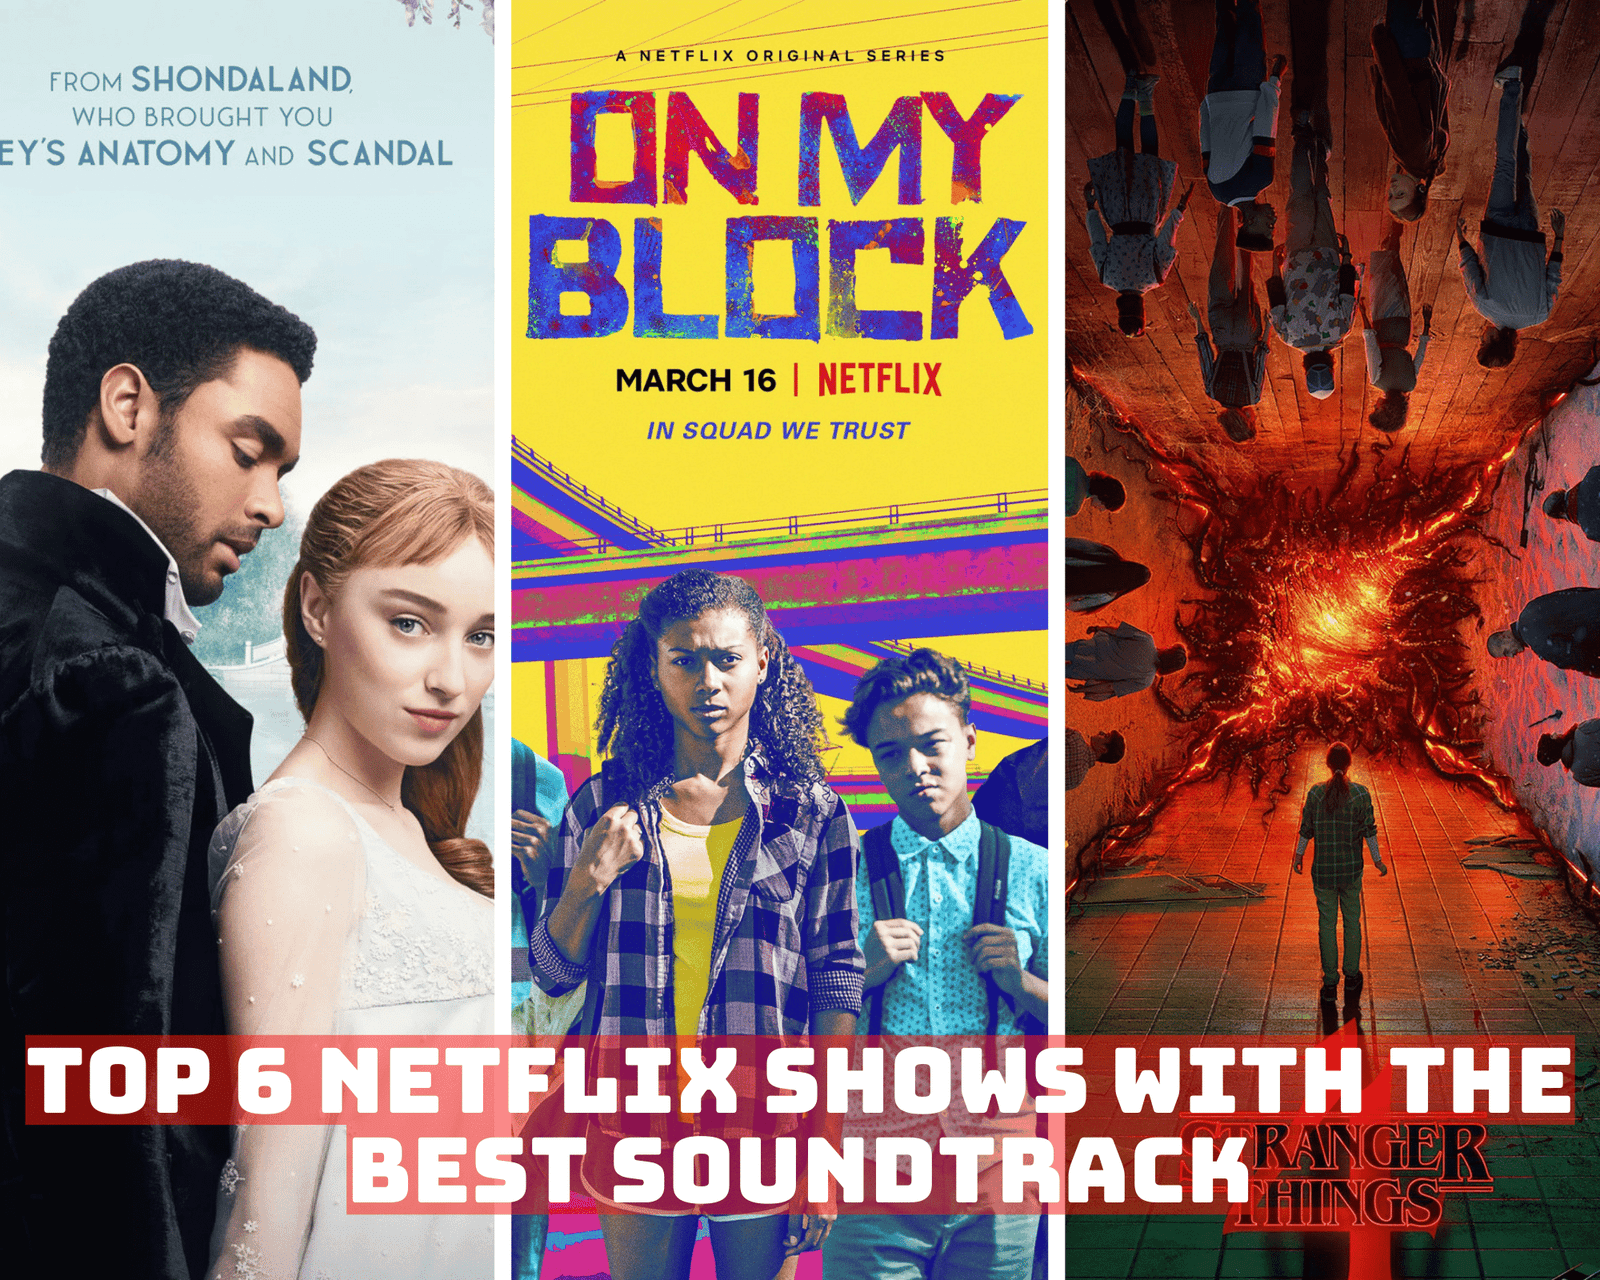 Top 6 Netflix Shows with the Best Soundtrack